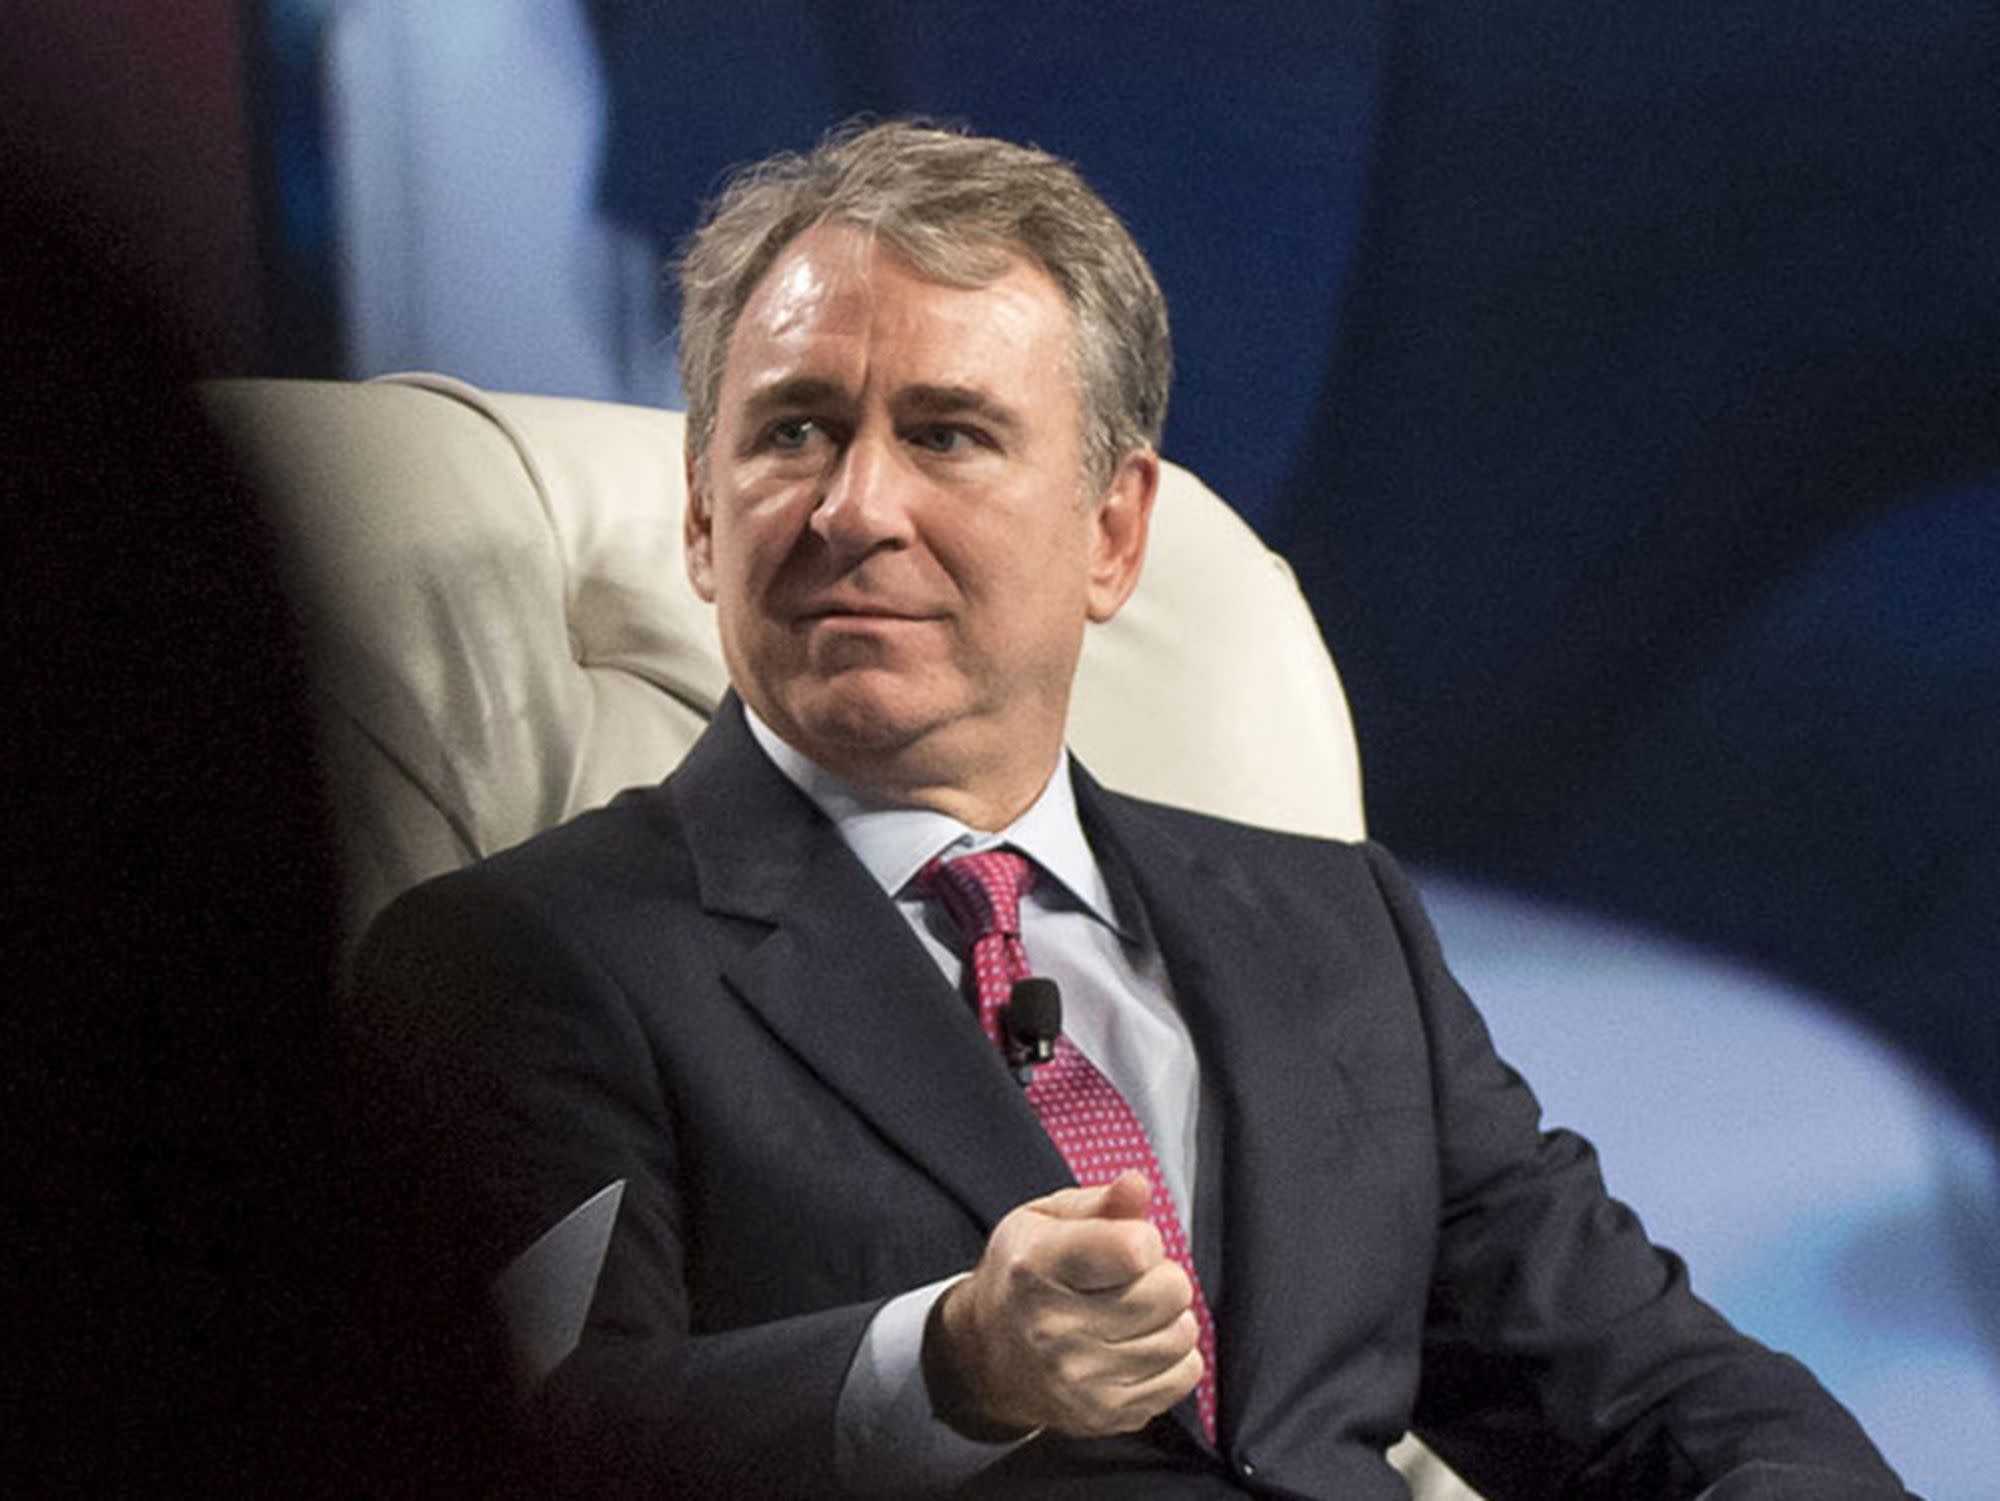 Citadel’s Ken Griffin is expected to testify at the House GameStop hearing